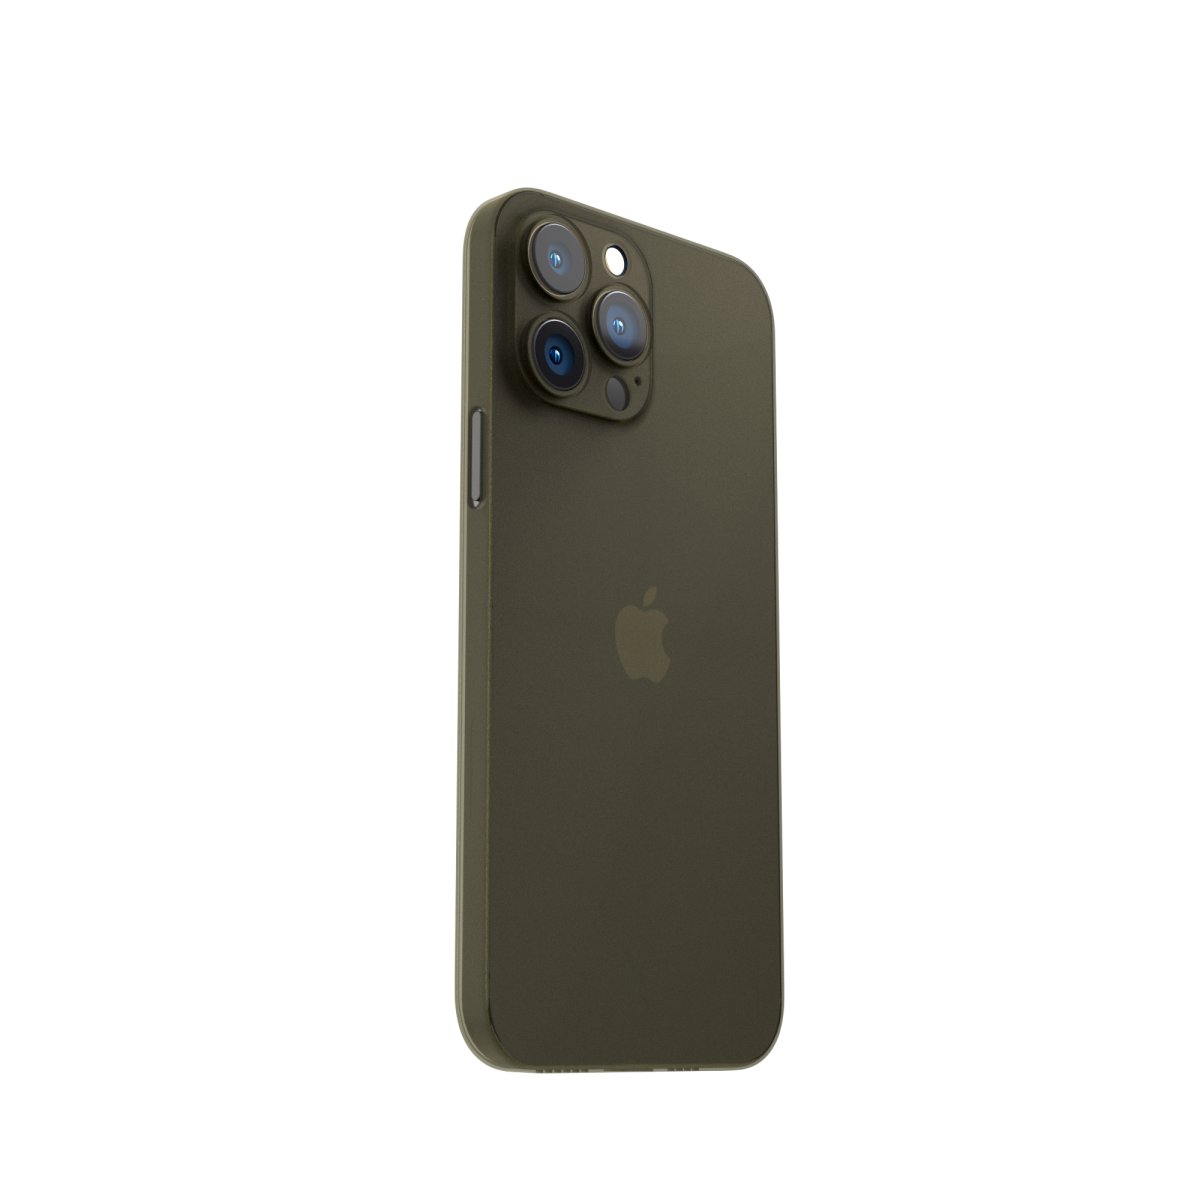 Slimcase Mobile Back Cover for iPhone 13 Pro Max - Slimcase IndiaCase